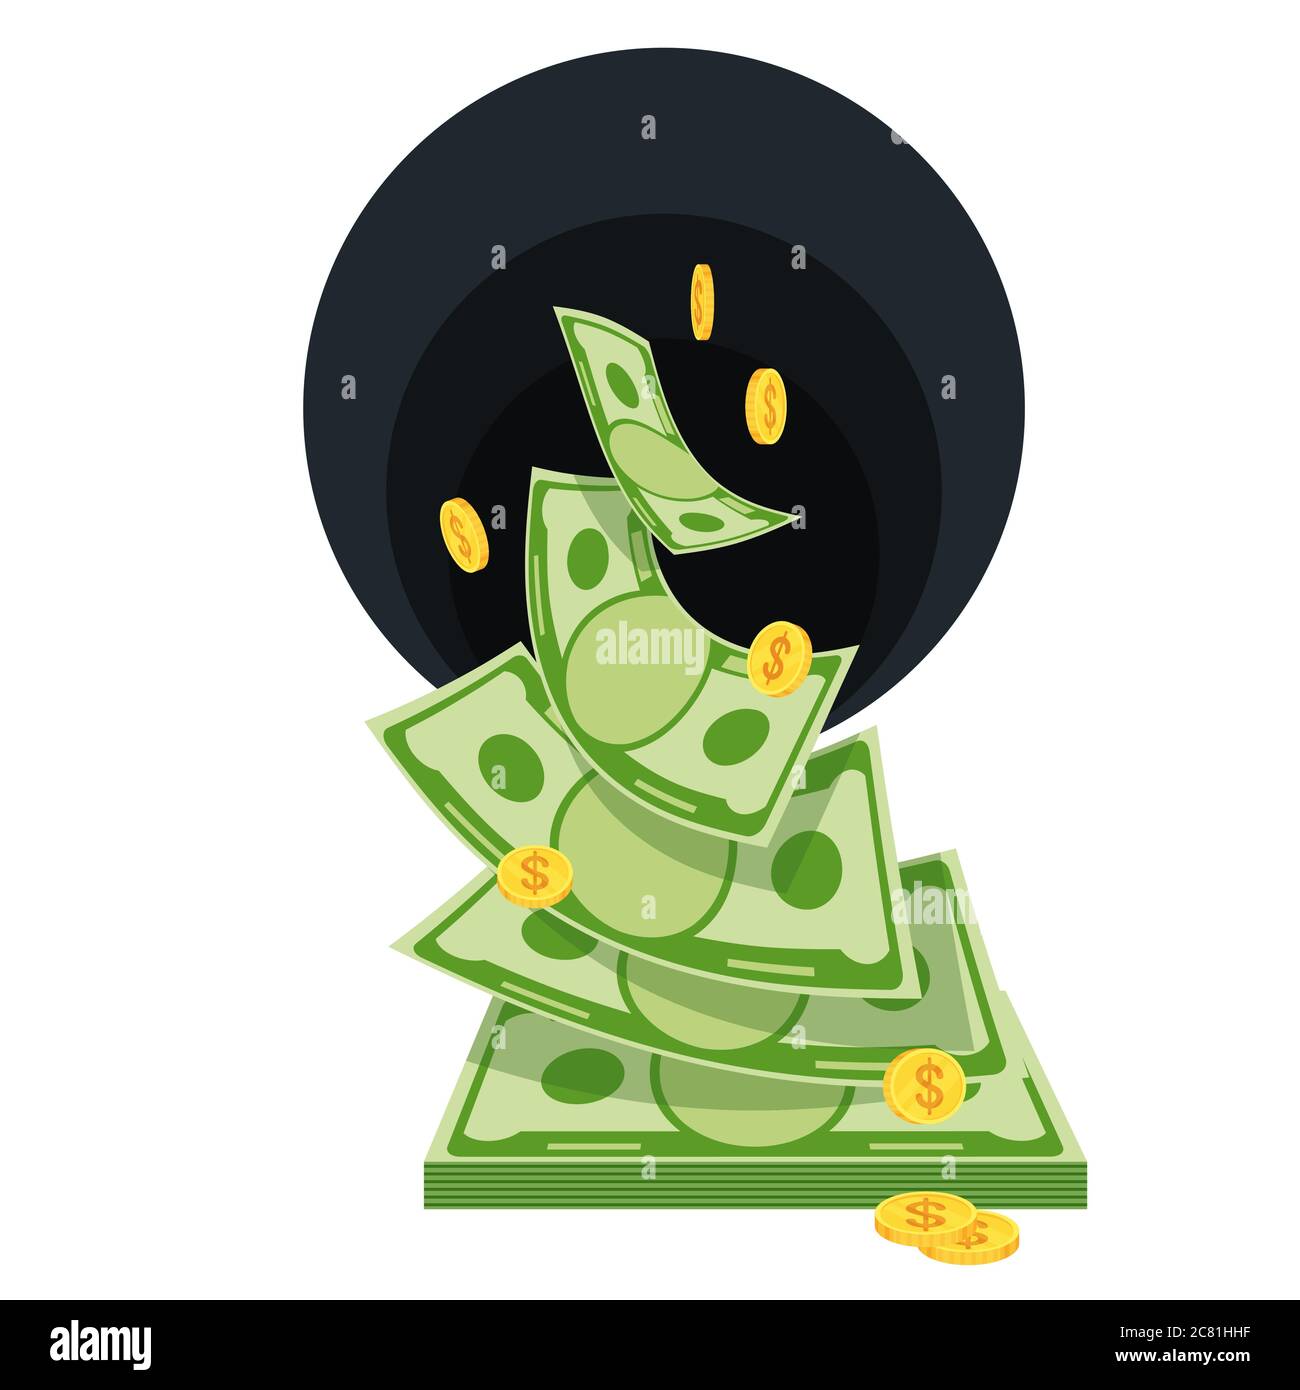 Black Hole Money. Waste of money. Banknotes fly away. Stock Vector